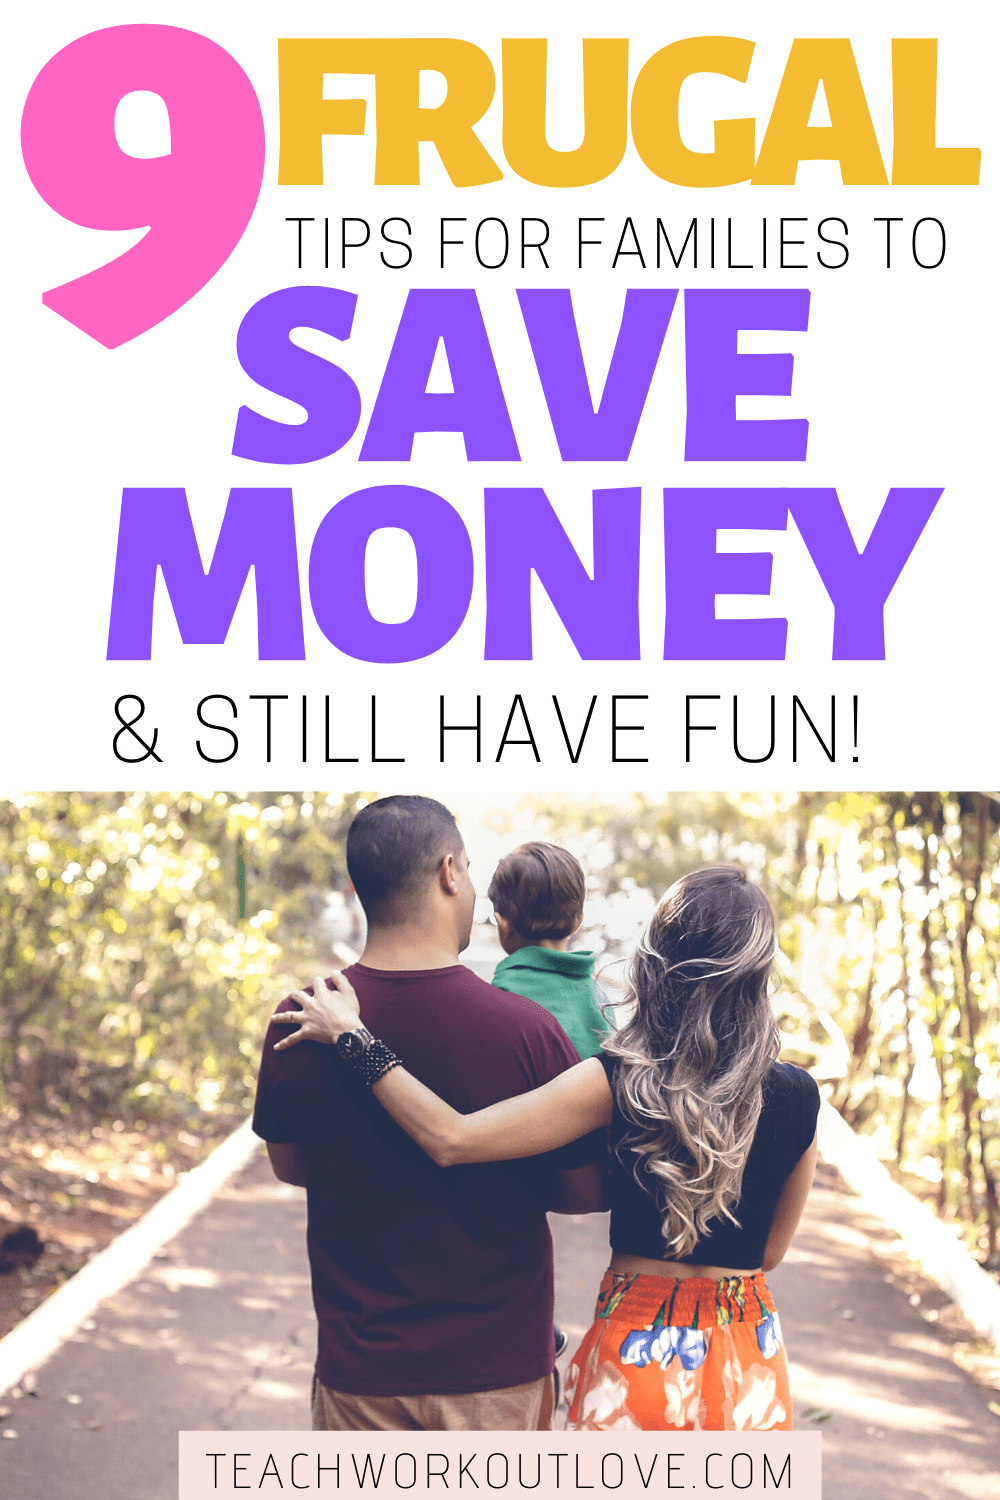 Spring is certainly here and means we all want to spend more time away from the TV, tech and screens. Here's 9 frugal tips for families to still have fun! 